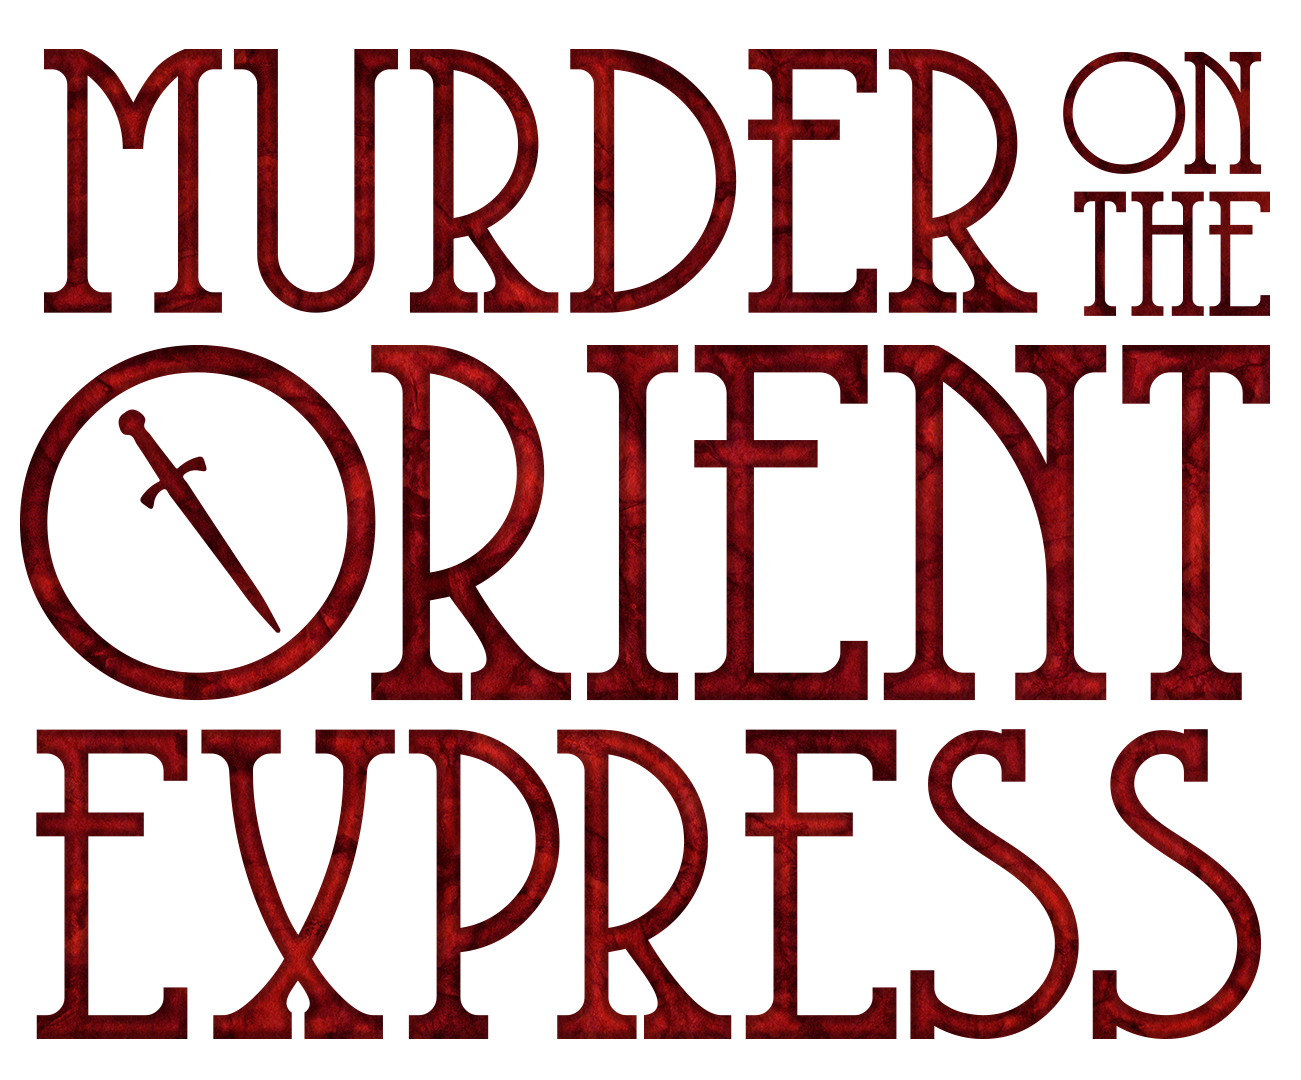 Dreaming of Murder on the Orient Express